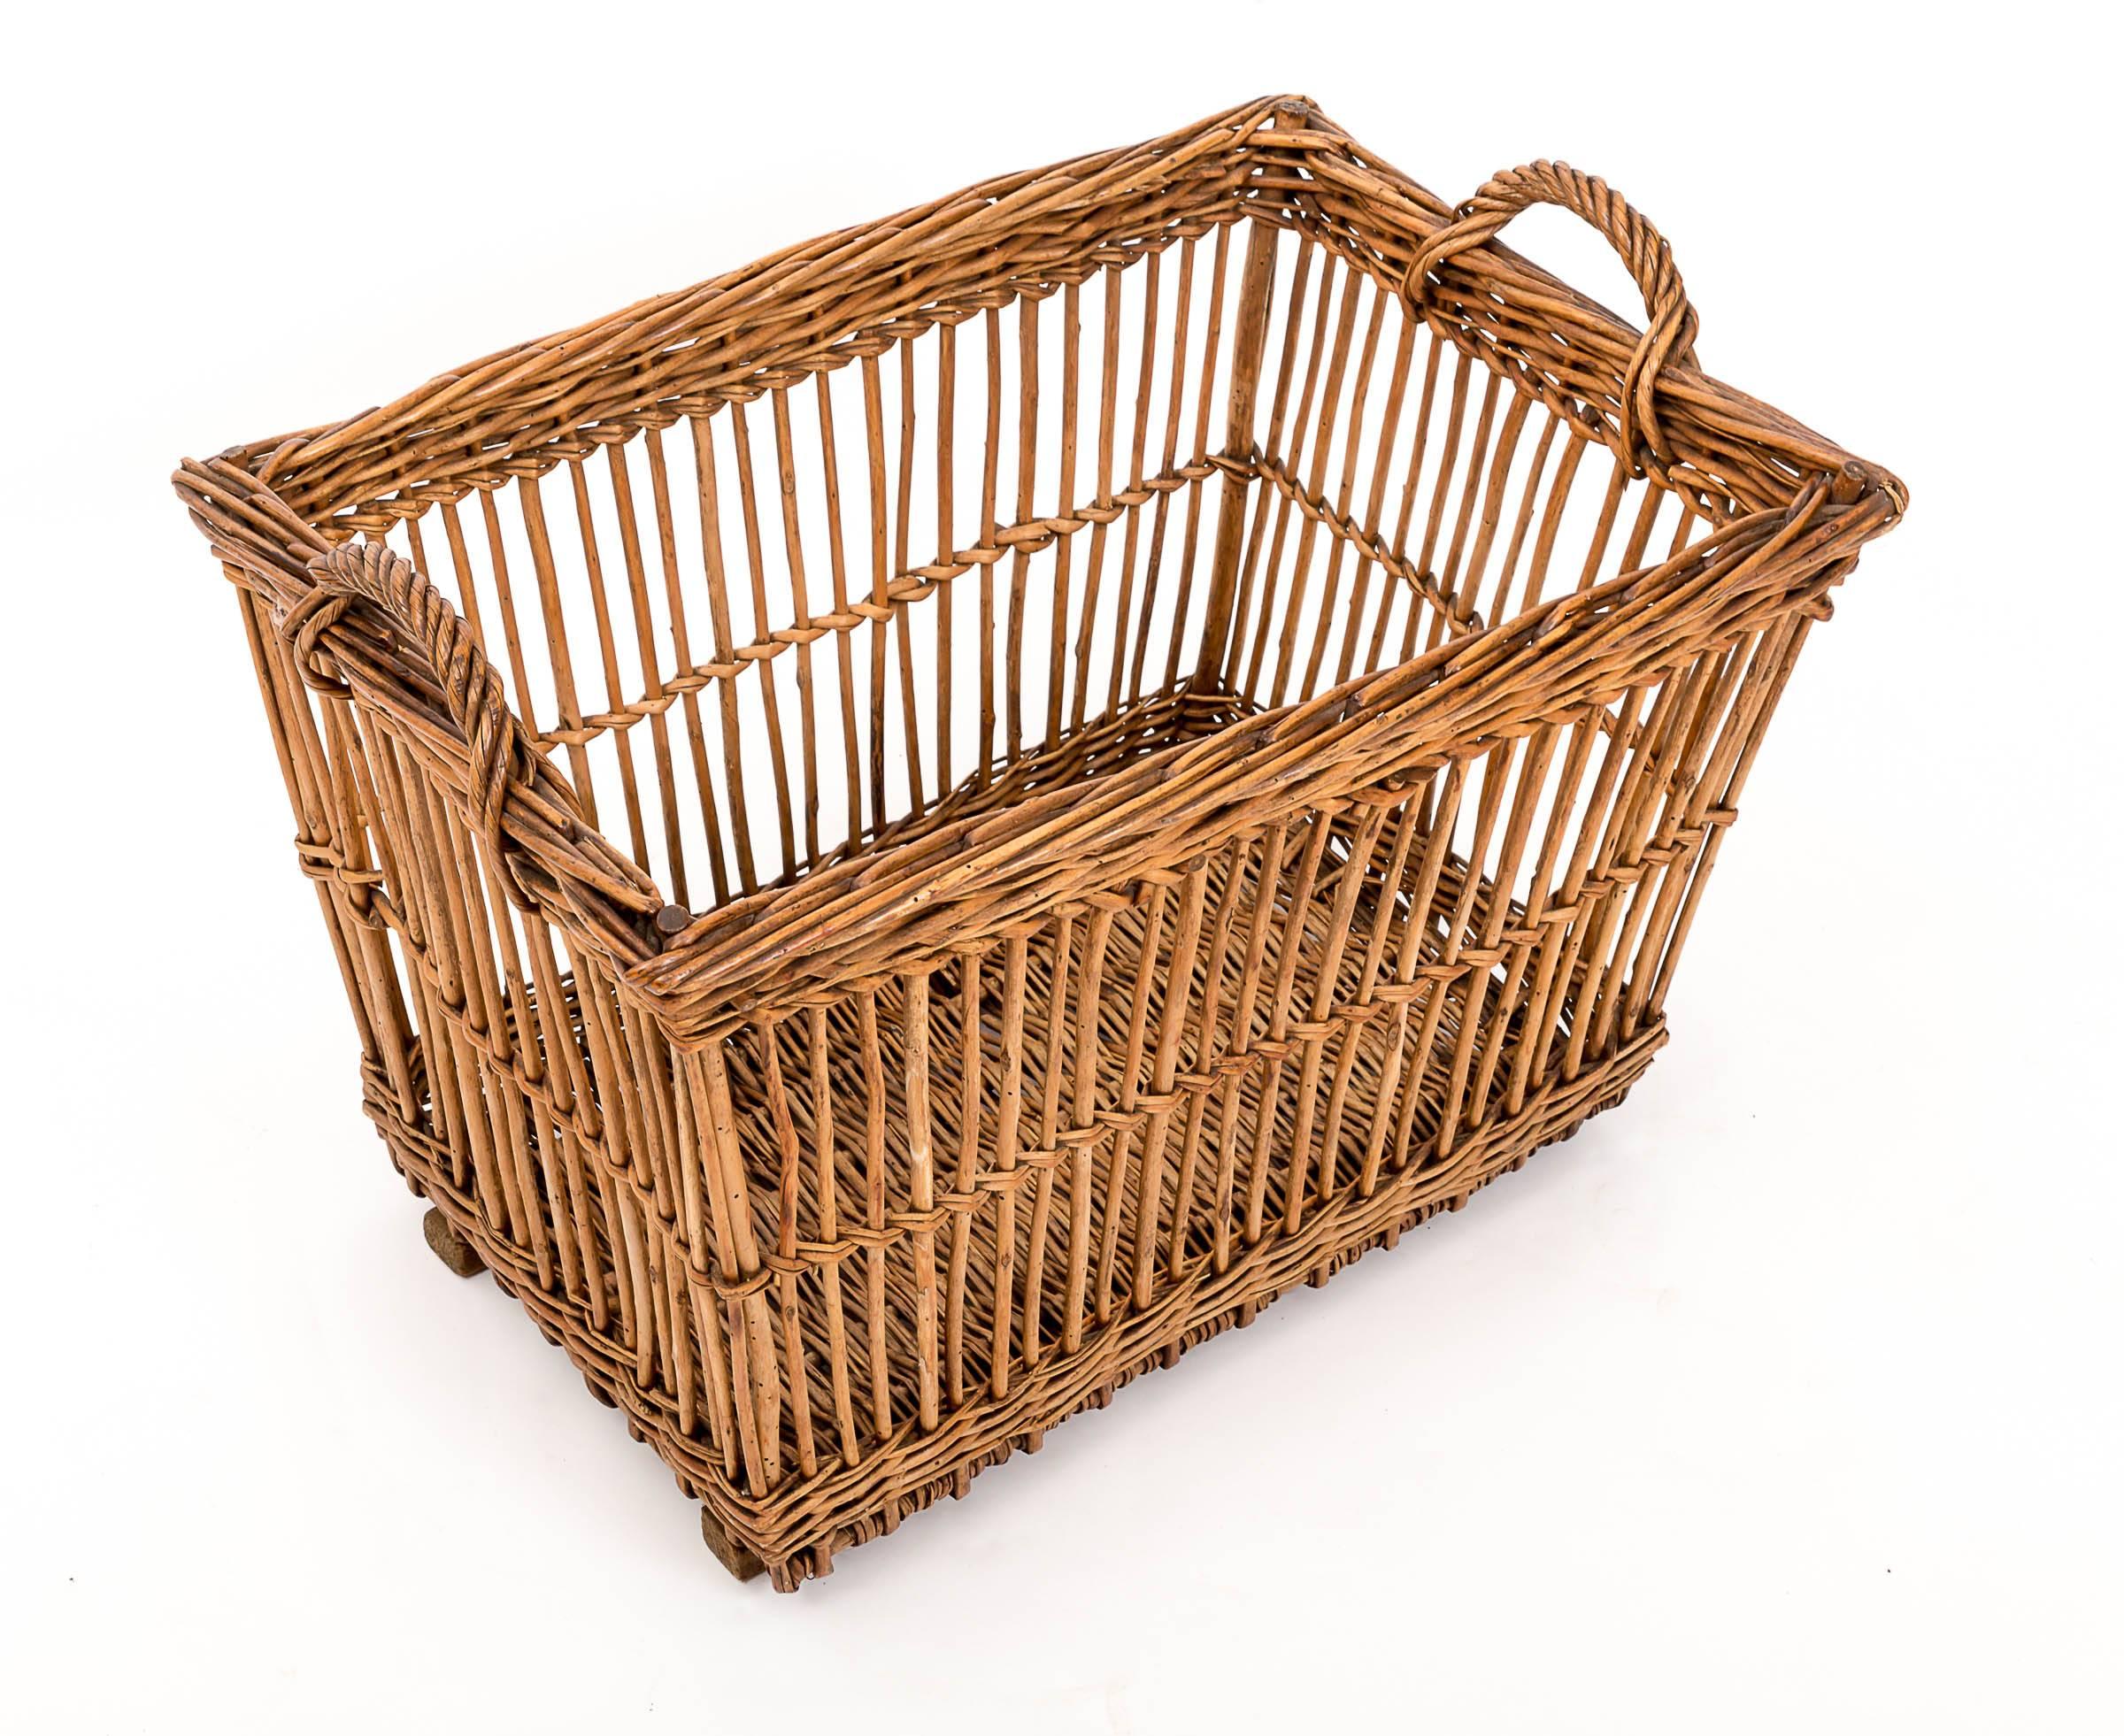 Wicker basket on wooden sledge feet with woven wicker handles, originally used to carry wine bottles. sturdy enough to hold firewood.